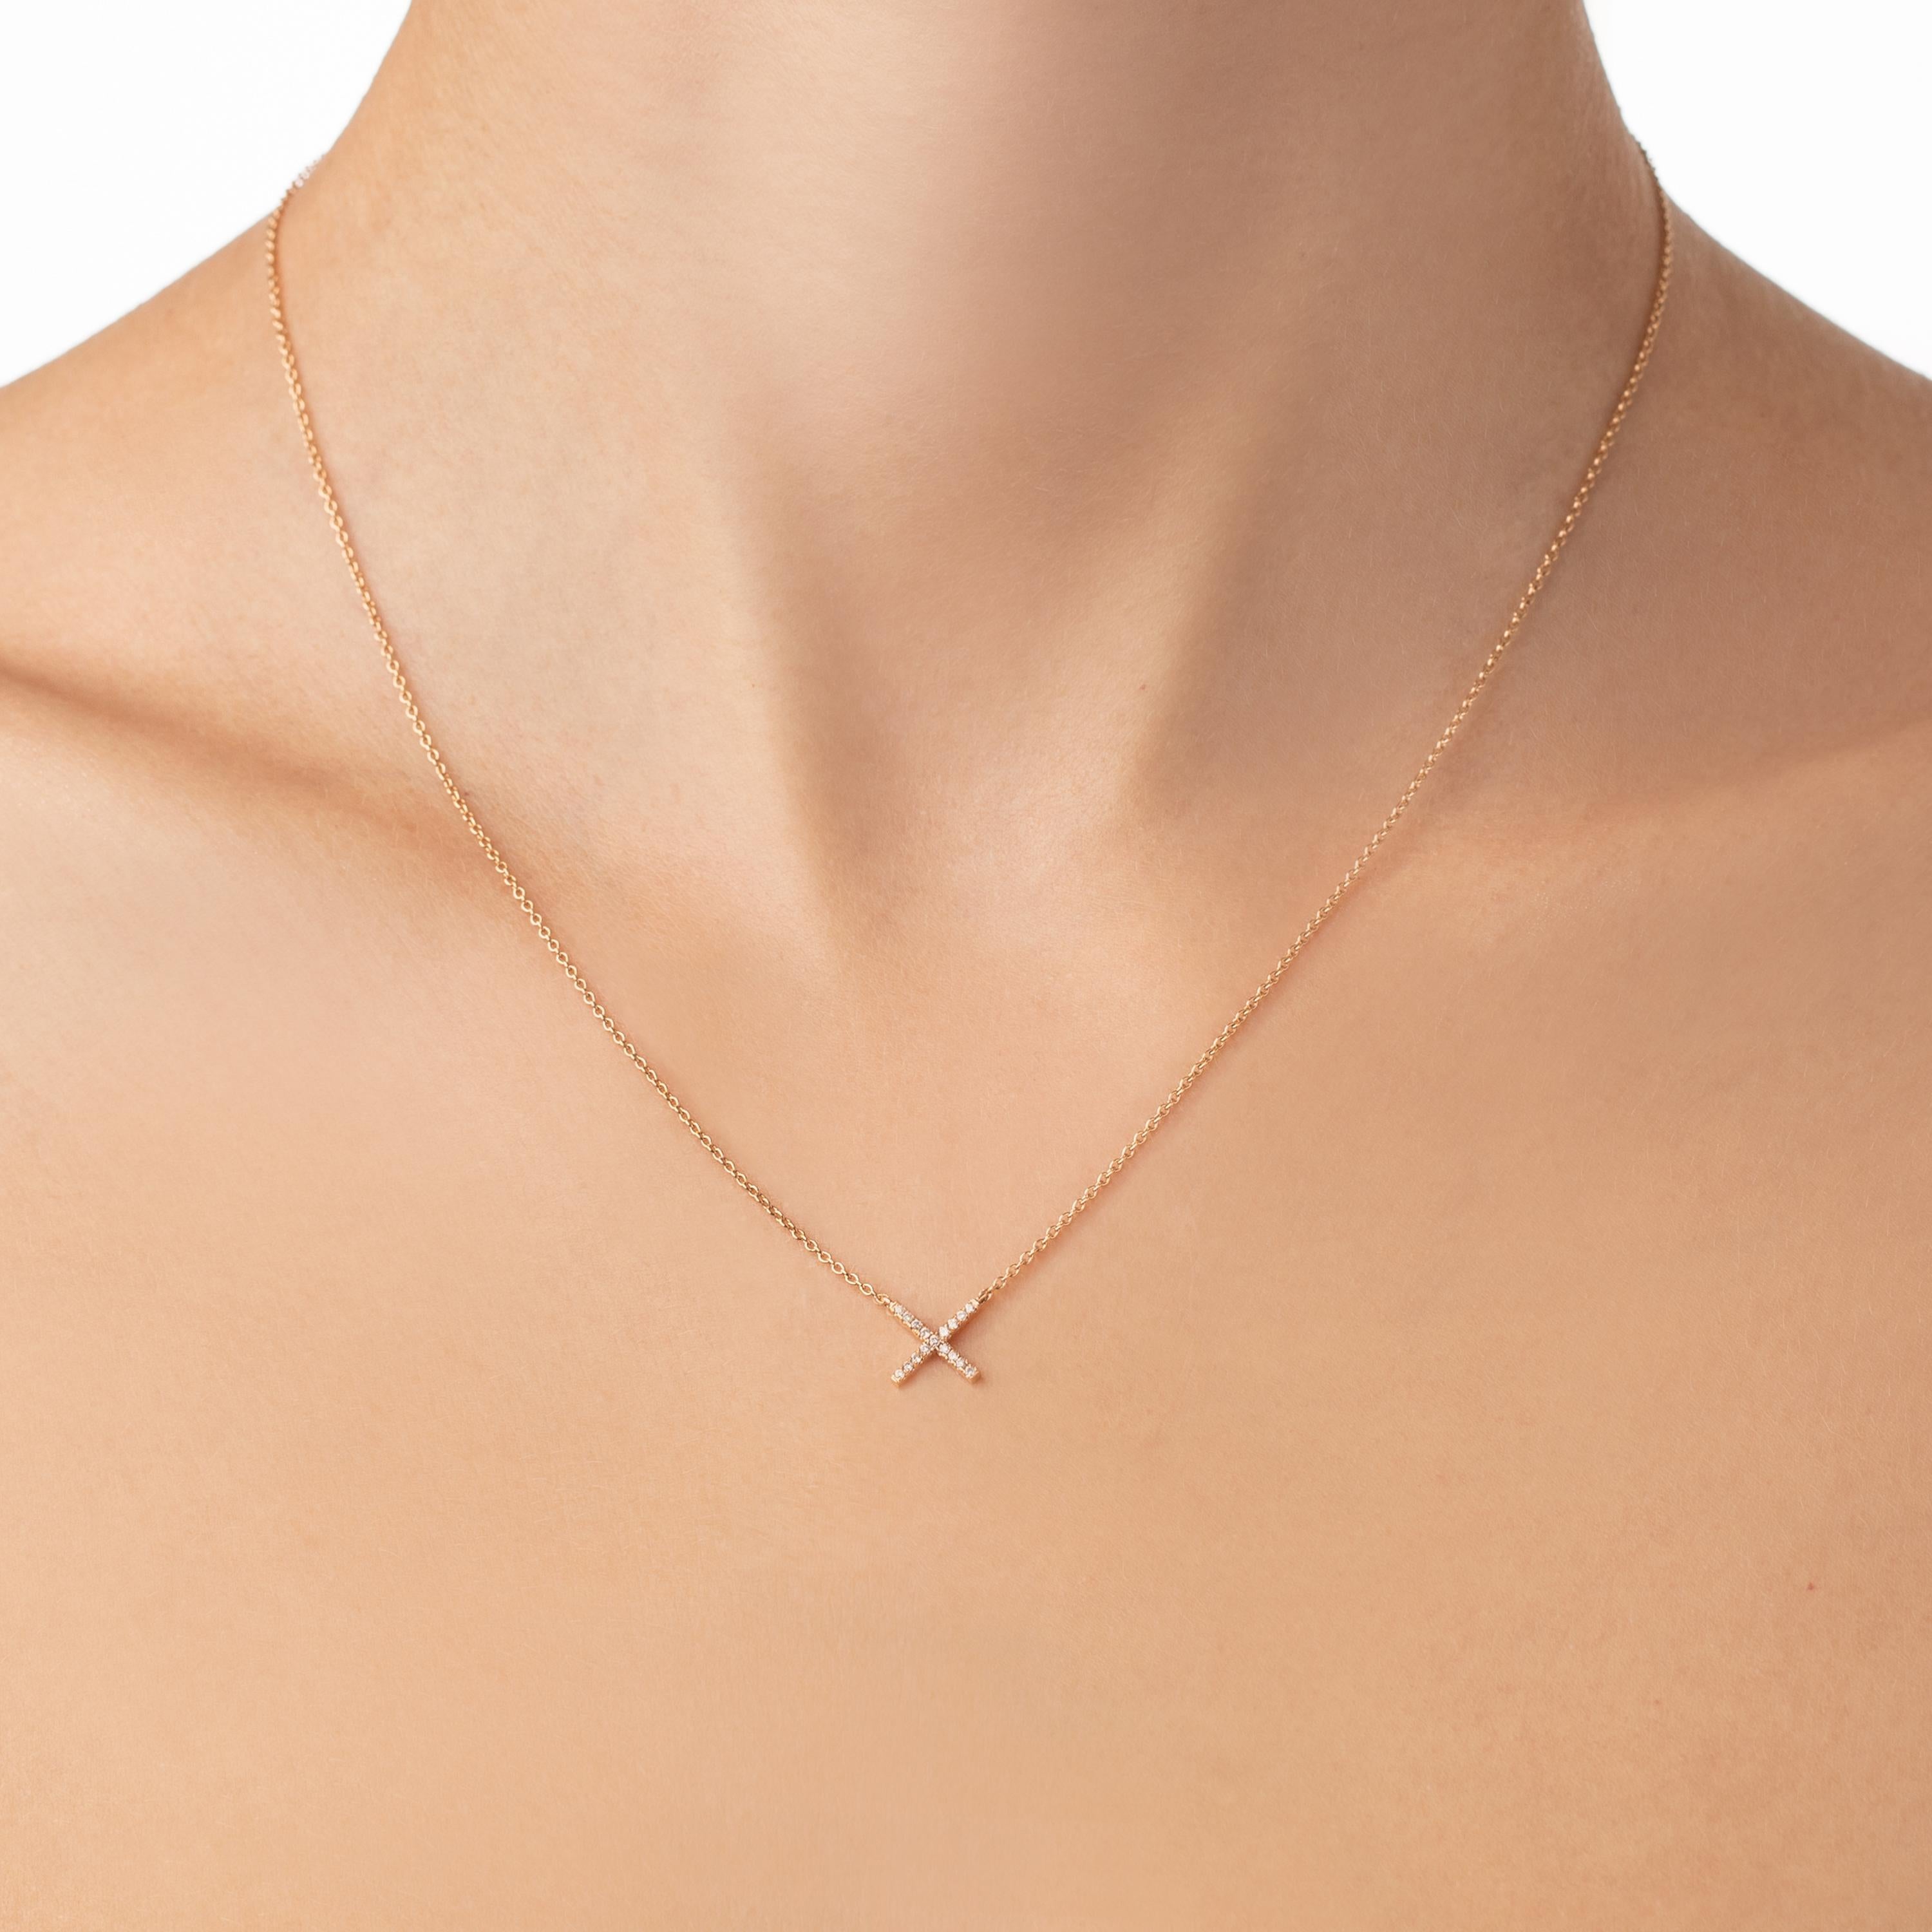 18K Rose Gold with Pale Champagne Diamonds on a rose gold chain. The necklace has the signature handmade custom Eva Fehren Clasp with a burnished White Diamond.

Handmade in New York City

The Eva Fehren design aesthetic allows women to build looks